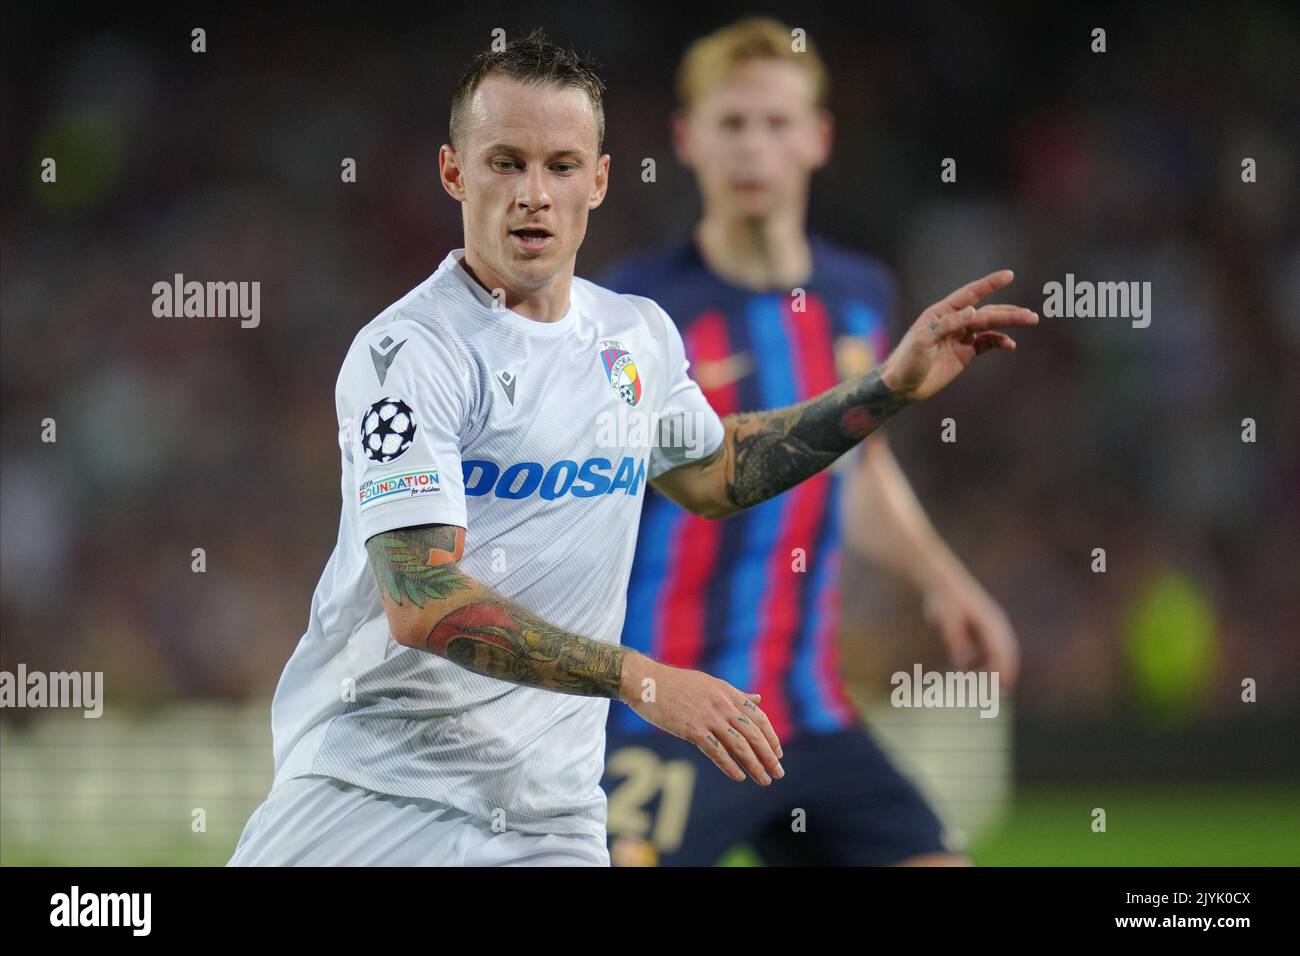 Barcelona, Spain. 07th Sep, 2022. Jan Sykora of Viktoria Plzen during the UEFA Champions League match between FC Barcelona and Viktoria Plzen, Group C, played at Spotify Camp Nou Stadum on Sep 7, 2022 in Barcelona, Spain. (Photo by Colas Buera/PRESSIN) Credit: PRESSINPHOTO SPORTS AGENCY/Alamy Live News Stock Photo